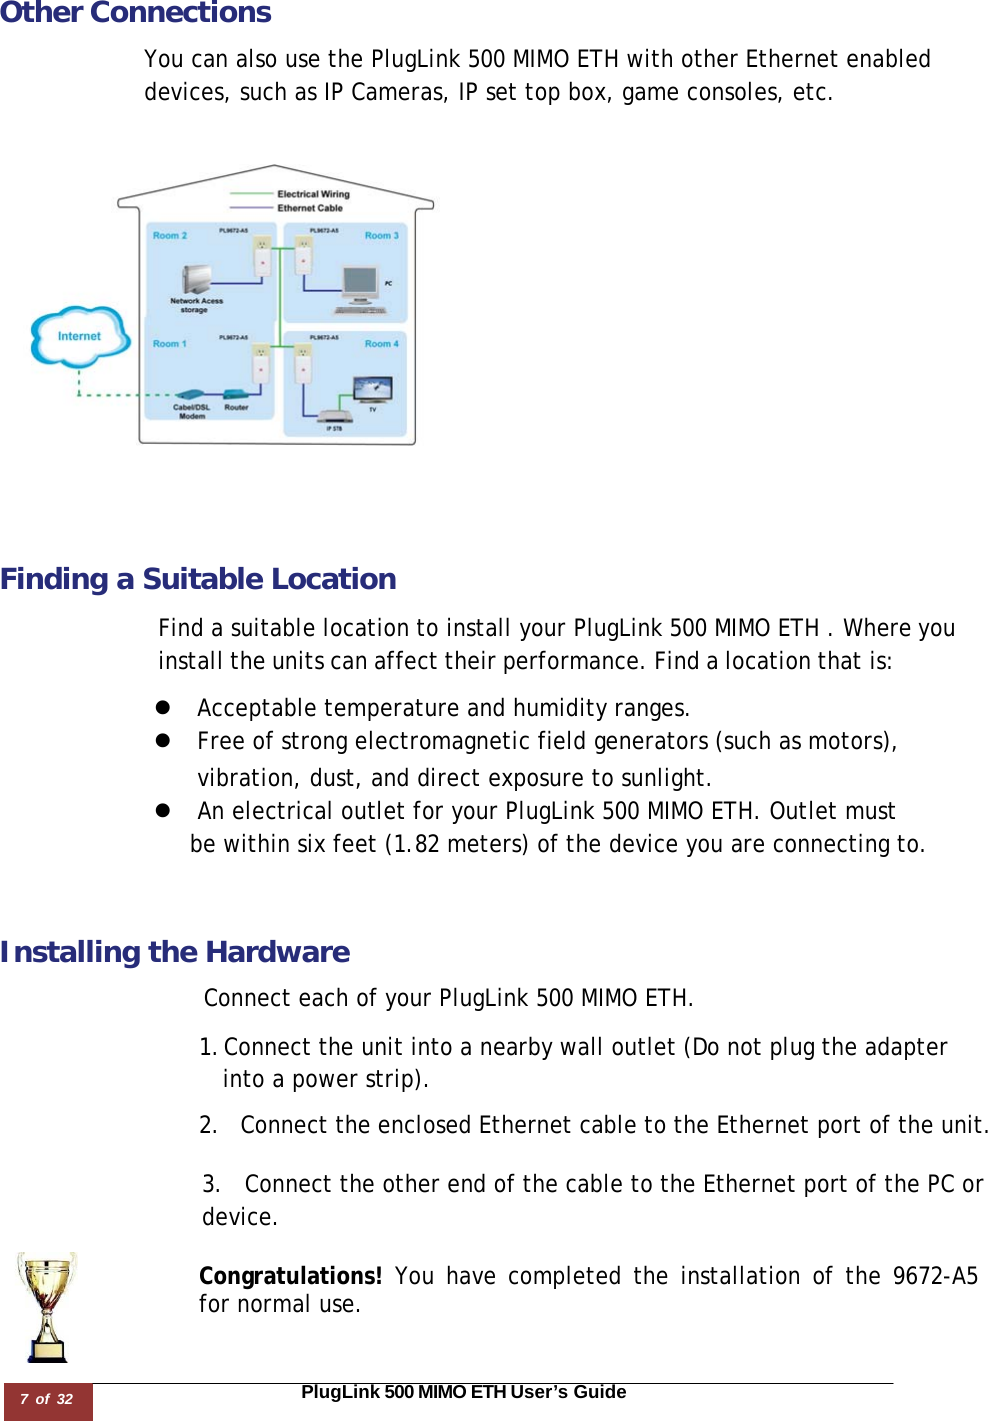 7 of 32                                                                                                                       PlugLink 500 MIMO ETH User’s Guide  Other Connections  You can also use the PlugLink 500 MIMO ETH with other Ethernet enabled devices, such as IP Cameras, IP set top box, game consoles, etc.    Finding a Suitable Location  Find a suitable location to install your PlugLink 500 MIMO ETH . Where you install the units can affect their performance. Find a location that is:  z  Acceptable temperature and humidity ranges. z  Free of strong electromagnetic field generators (such as motors),  vibration, dust, and direct exposure to sunlight. z  An electrical outlet for your PlugLink 500 MIMO ETH. Outlet must be within six feet (1.82 meters) of the device you are connecting to.    Installing the Hardware  Connect each of your PlugLink 500 MIMO ETH.  1. Connect the unit into a nearby wall outlet (Do not plug the adapter  into a power strip).  2.  Connect the enclosed Ethernet cable to the Ethernet port of the unit.   3.  Connect the other end of the cable to the Ethernet port of the PC or device.  Congratulations! You have completed the installation of the 9672-A5  for normal use. 